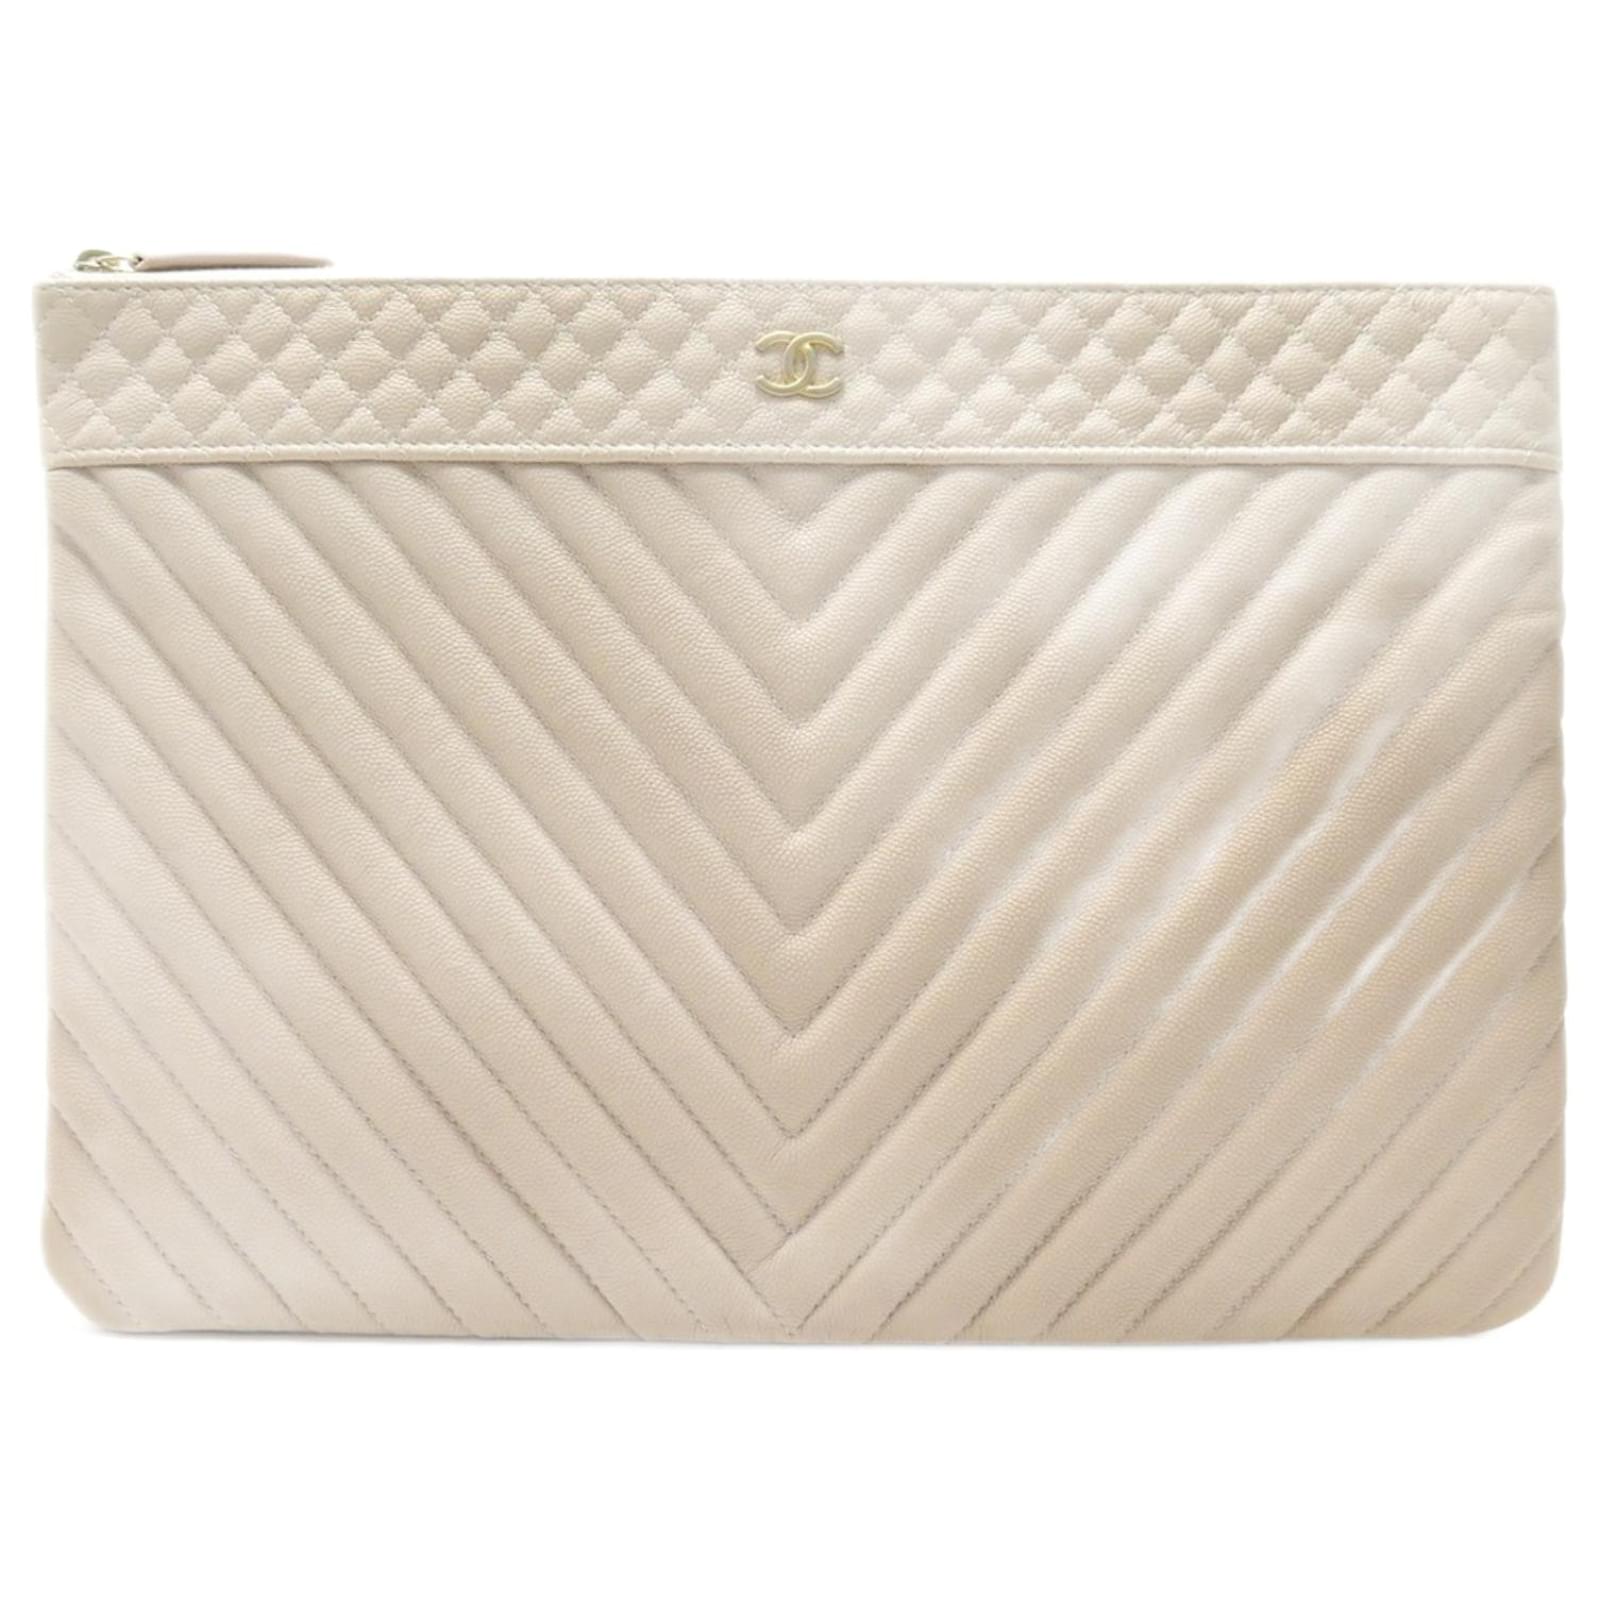 NEW LARGE CHANEL CHEVRON CLUTCH IN CAVIAR BEIGE LEATHER NEW LEATHER POUCH  ref.797195 - Joli Closet